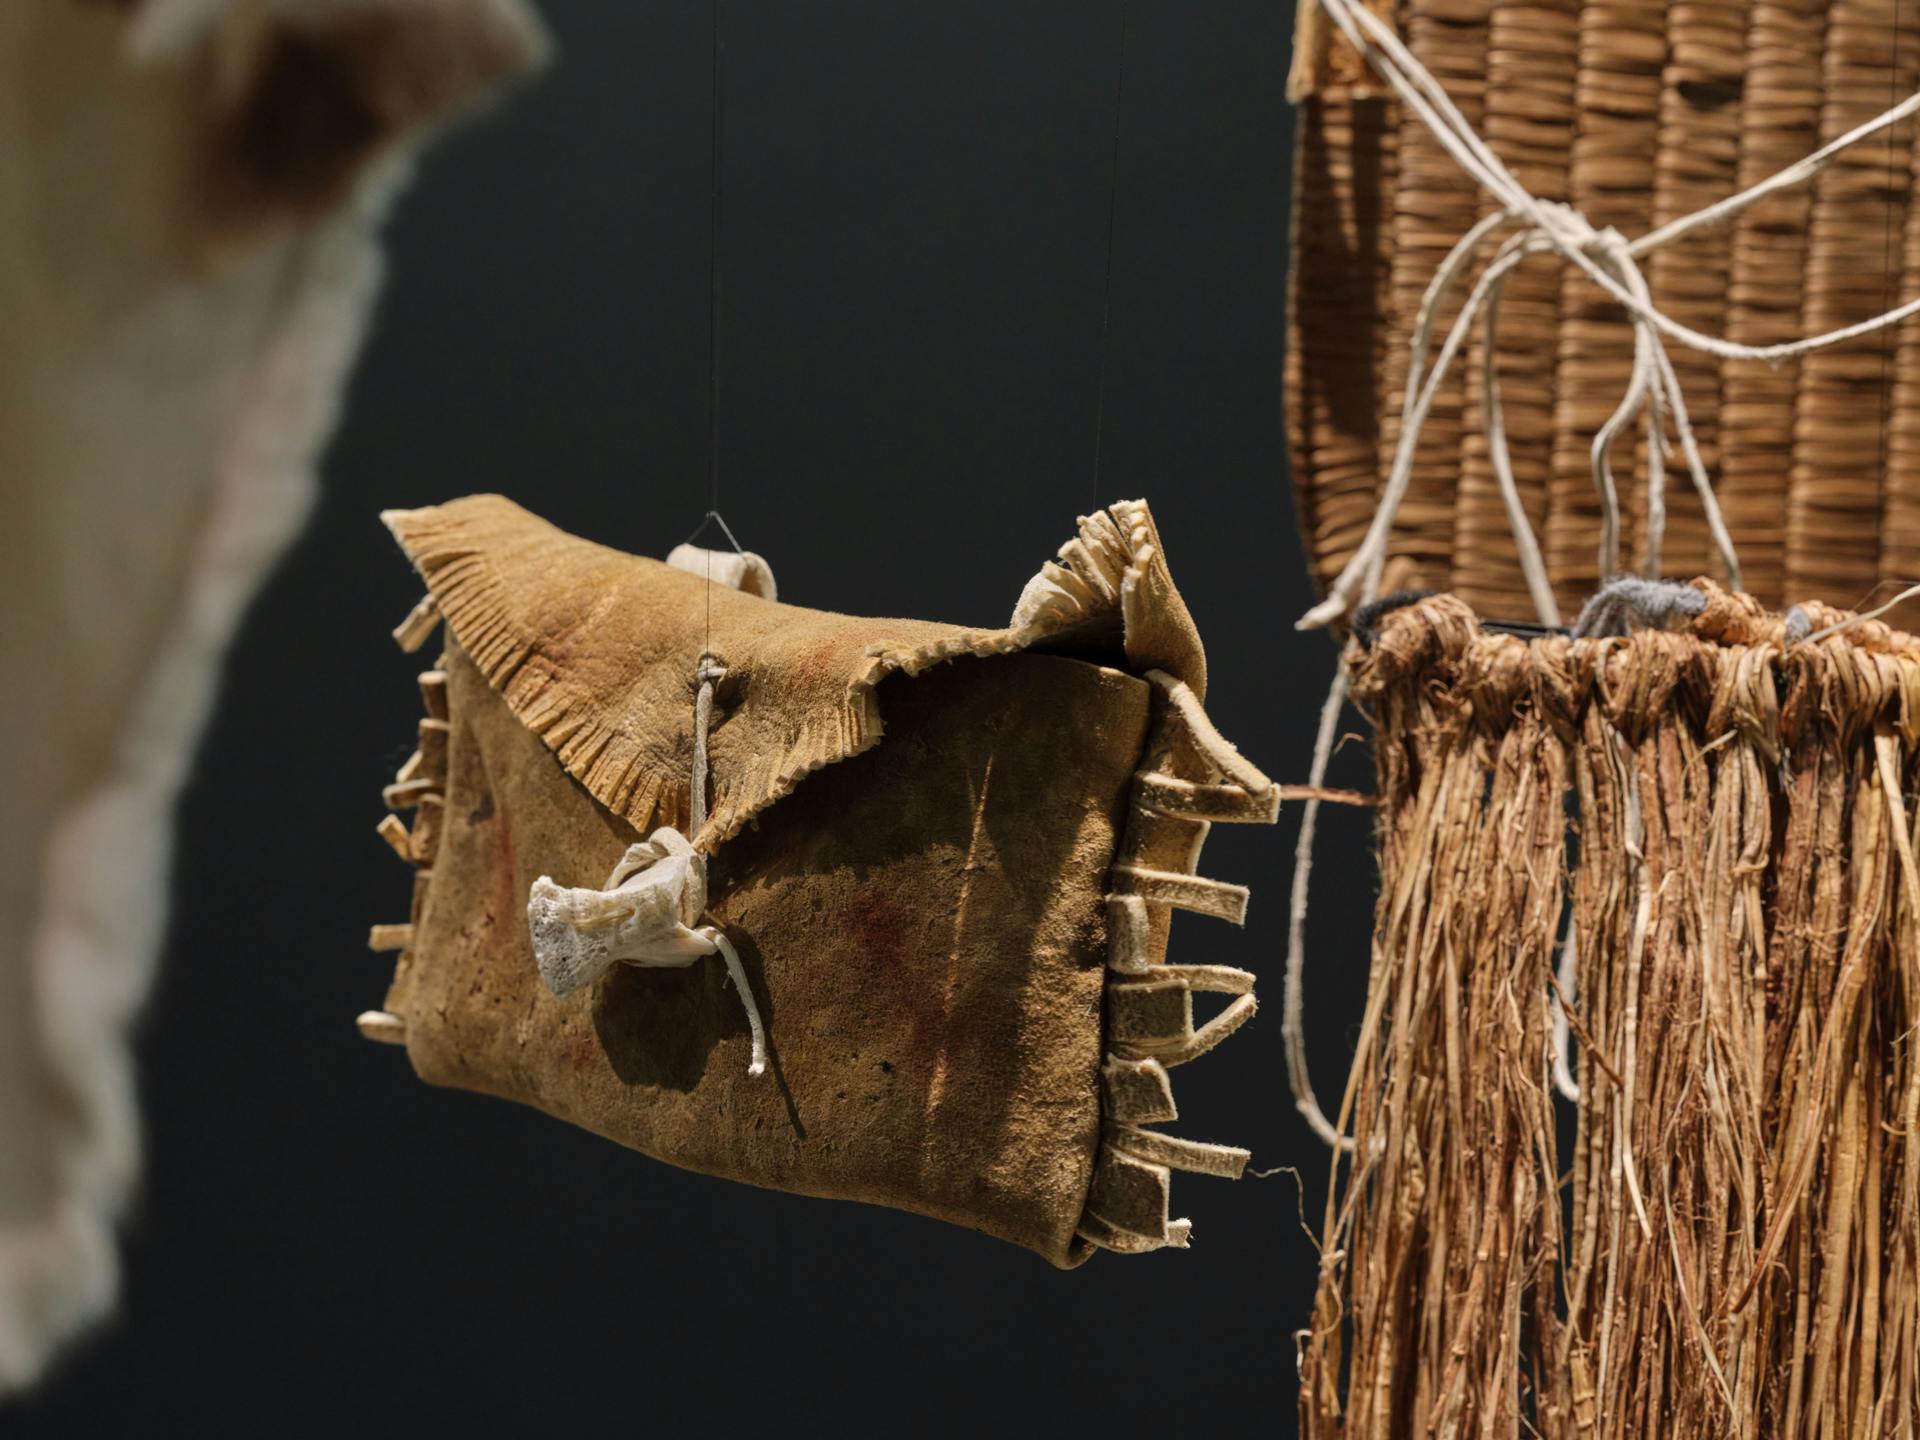 a suspended envelope-shaped bag made of tanned leather suspended between the edges of a hide robe and cedar war apron and breastplate. the bag is fringed on its right and left edges and on the edge of the flap, and held closed by a small bone.